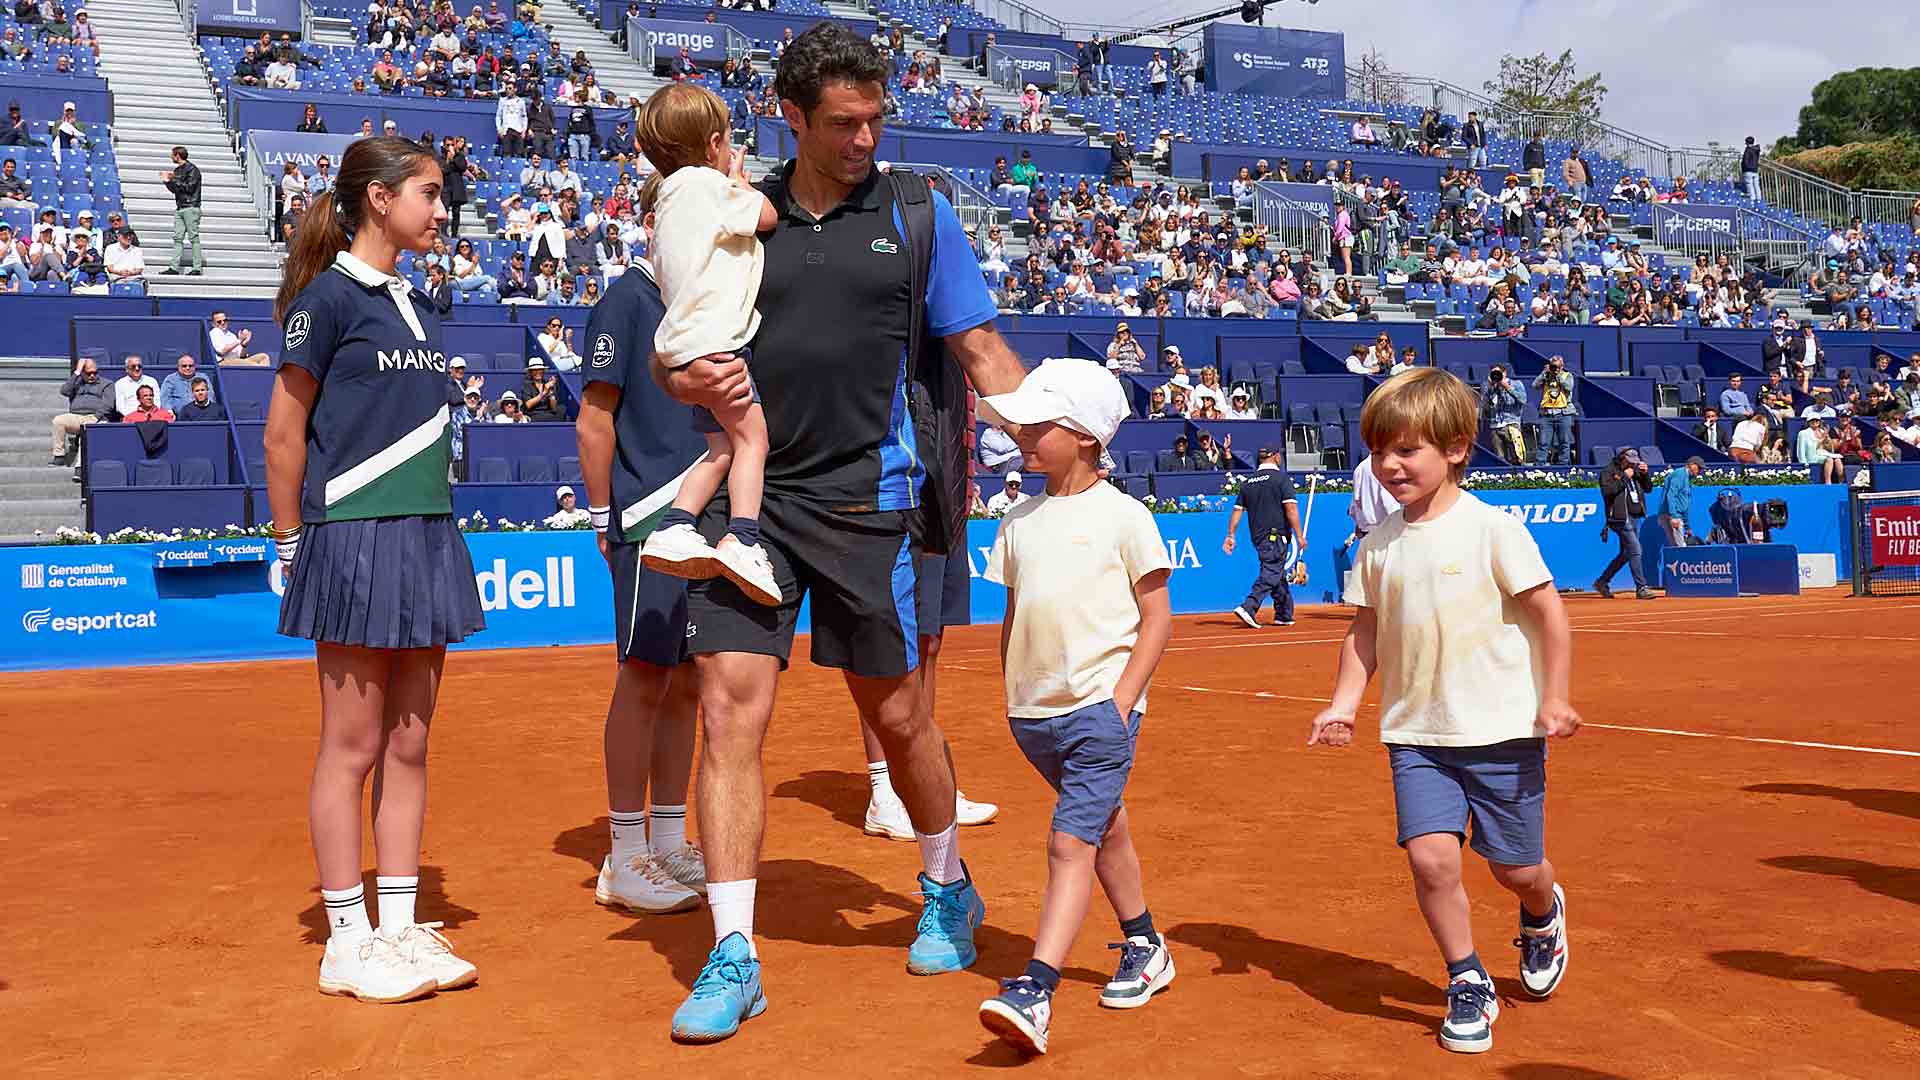 Pablo Andujar is surrounded by his family for his final match at the Barcelona Open Banc Sabadell on Monday.